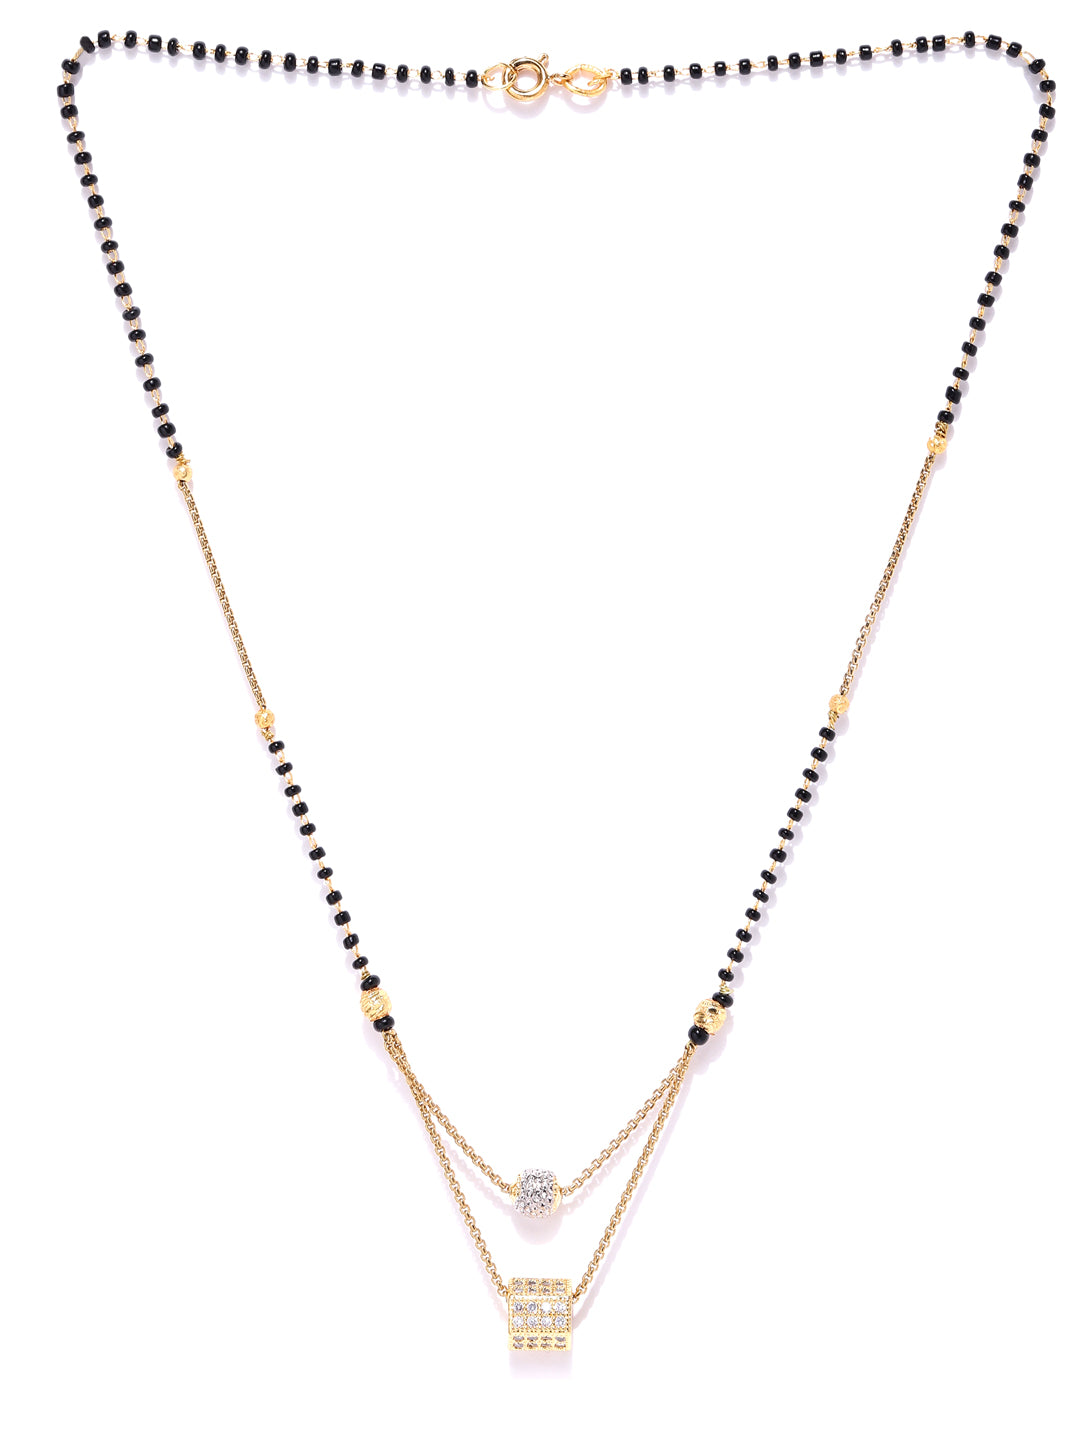 Gold-Plated AD Studded Geometric Pendant Black Beaded Chain Mangalsutra